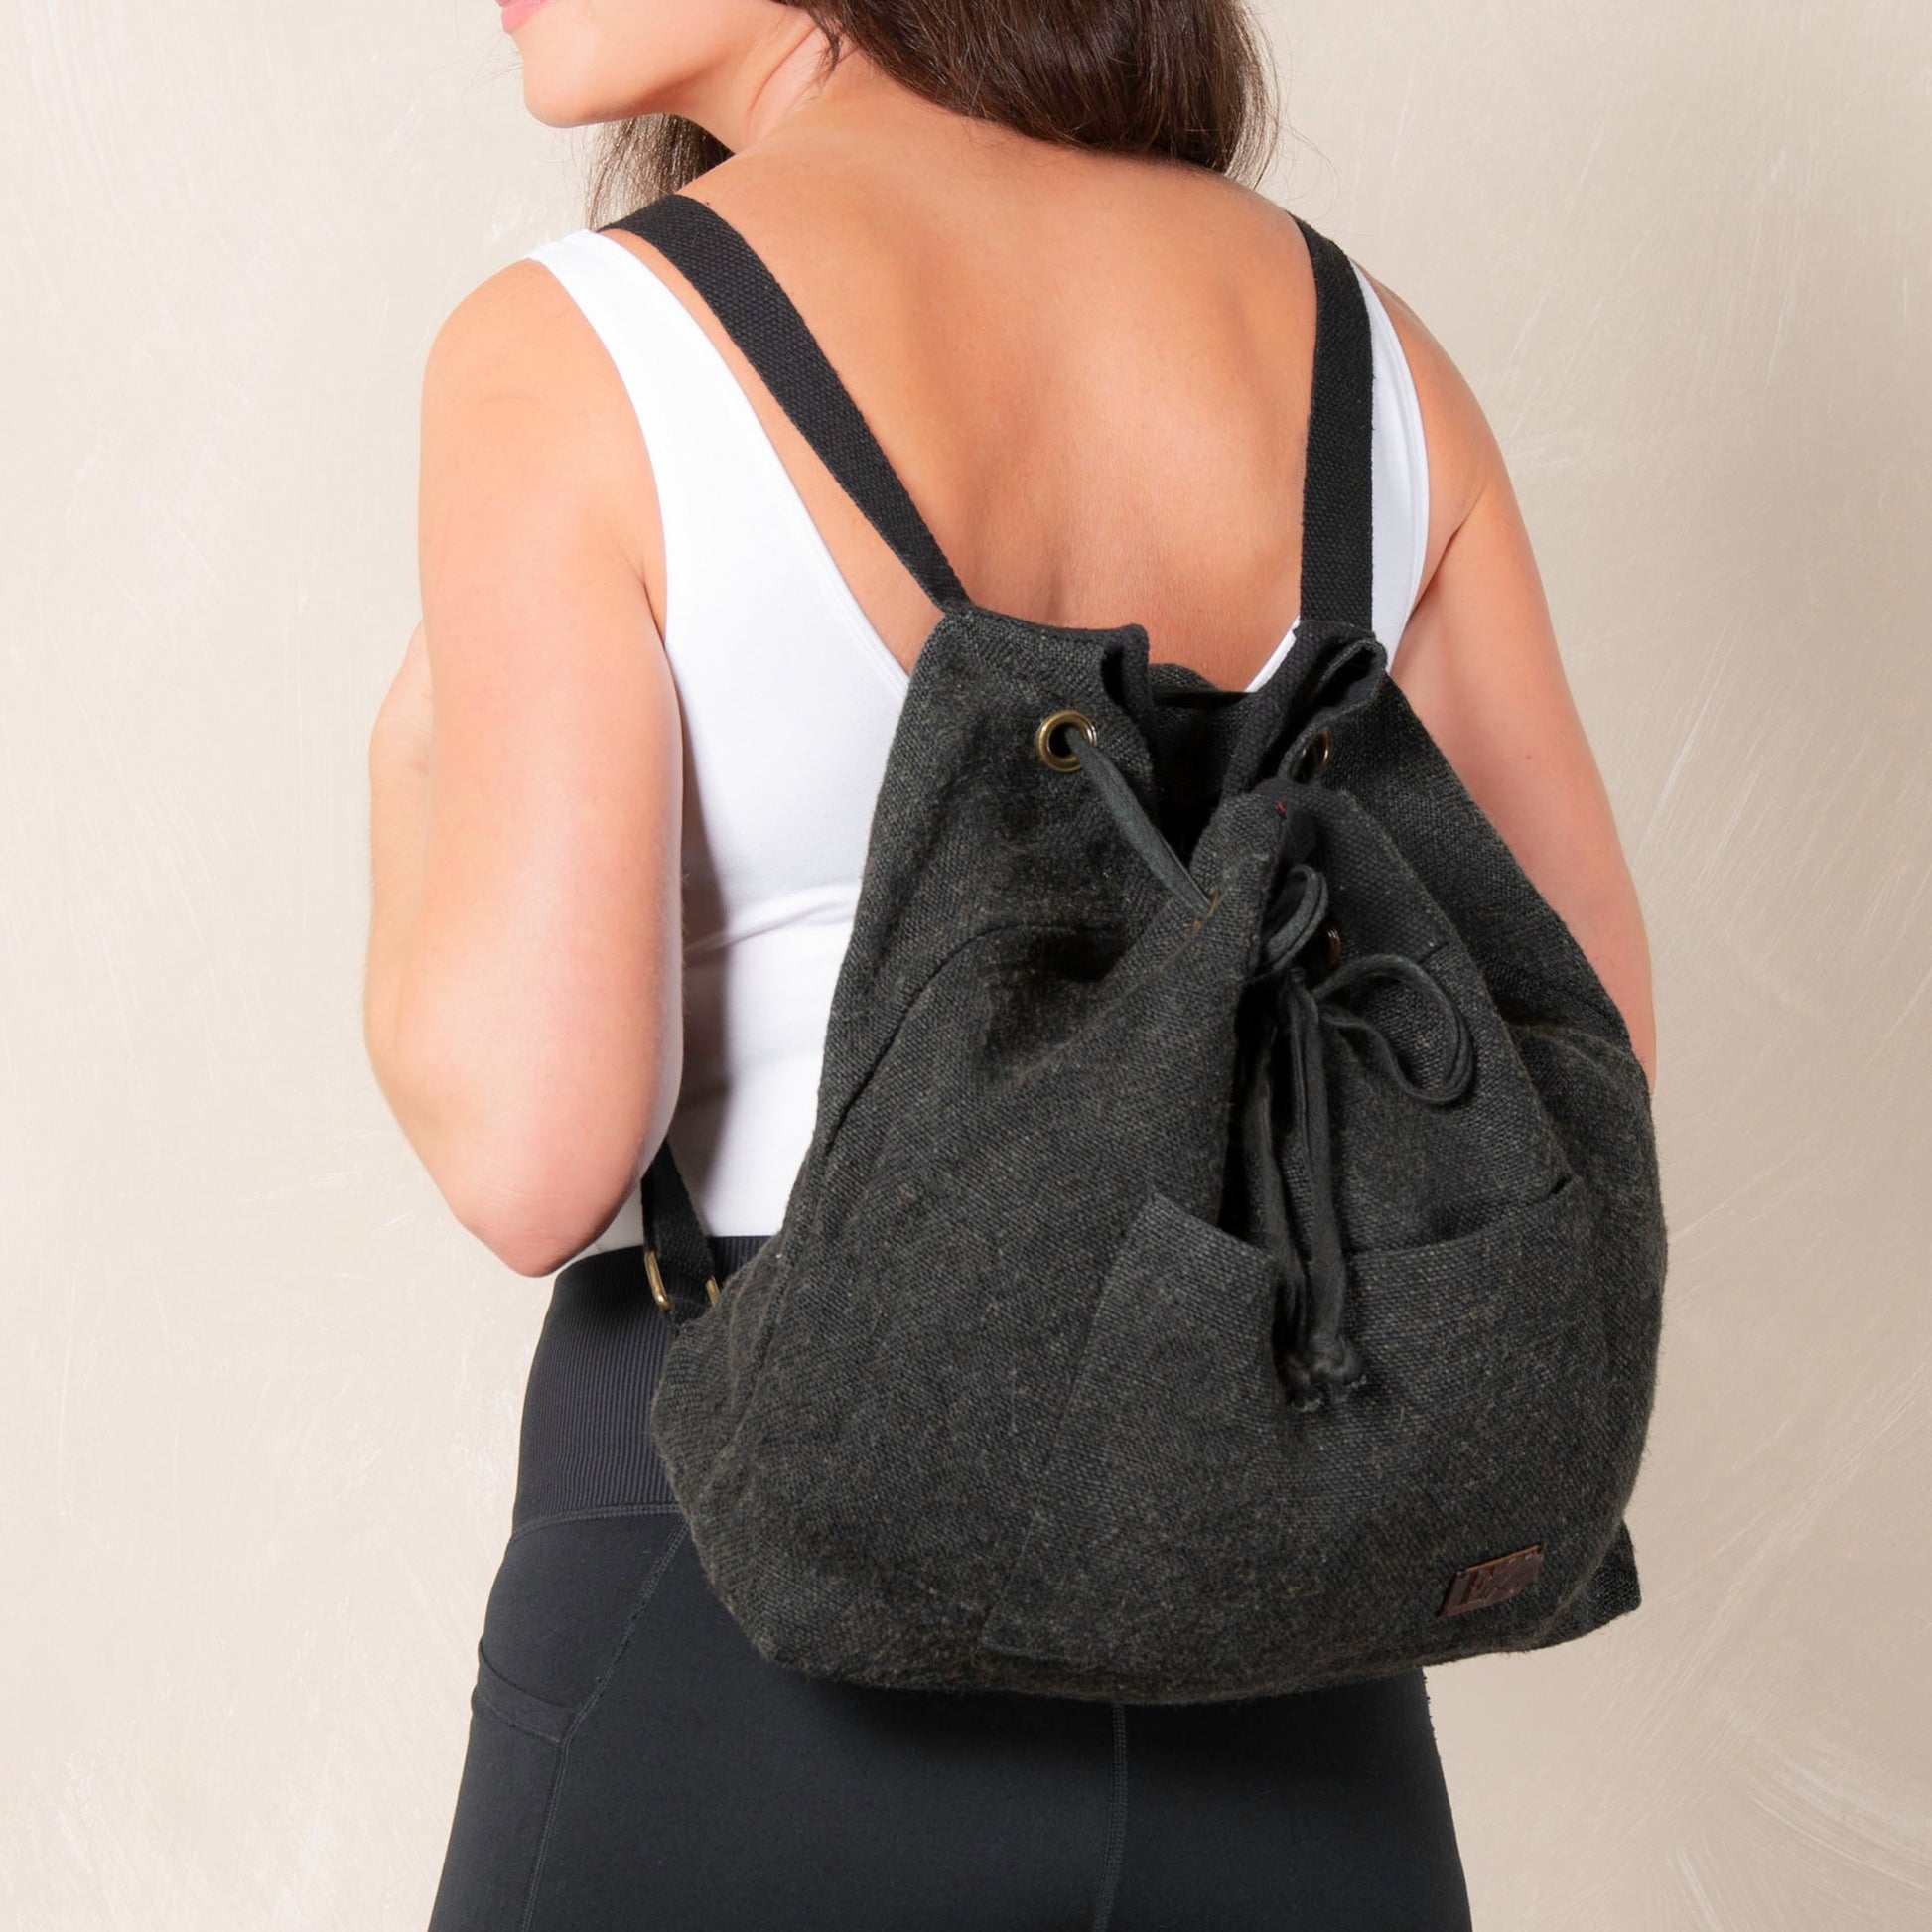 Cailey Jute Backpack